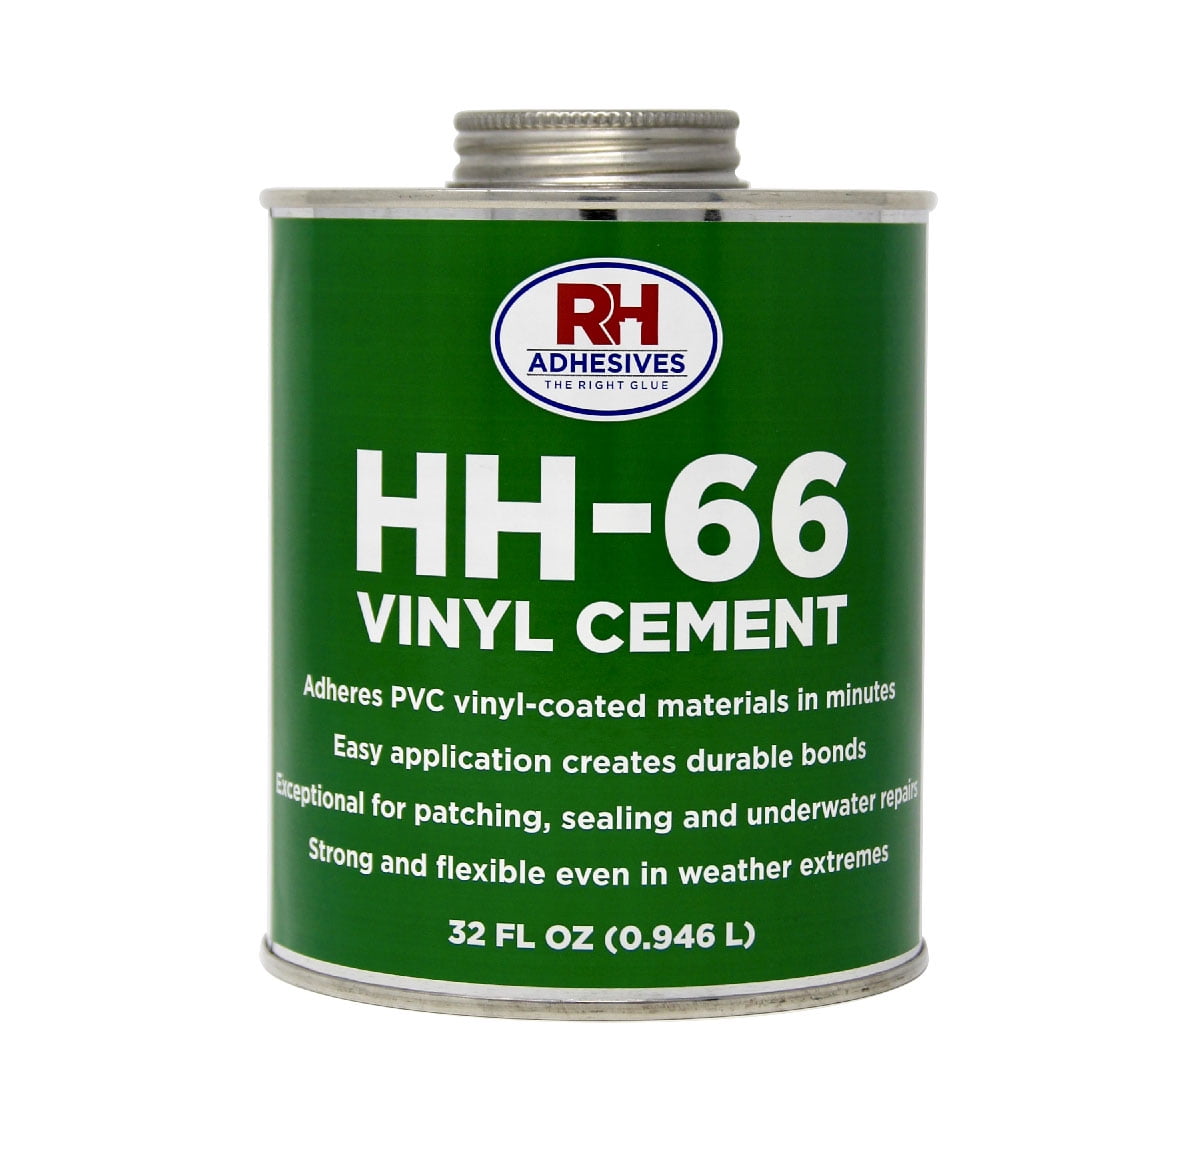 Learn more about HH-66 Vinyl Cement - RH Adhesives